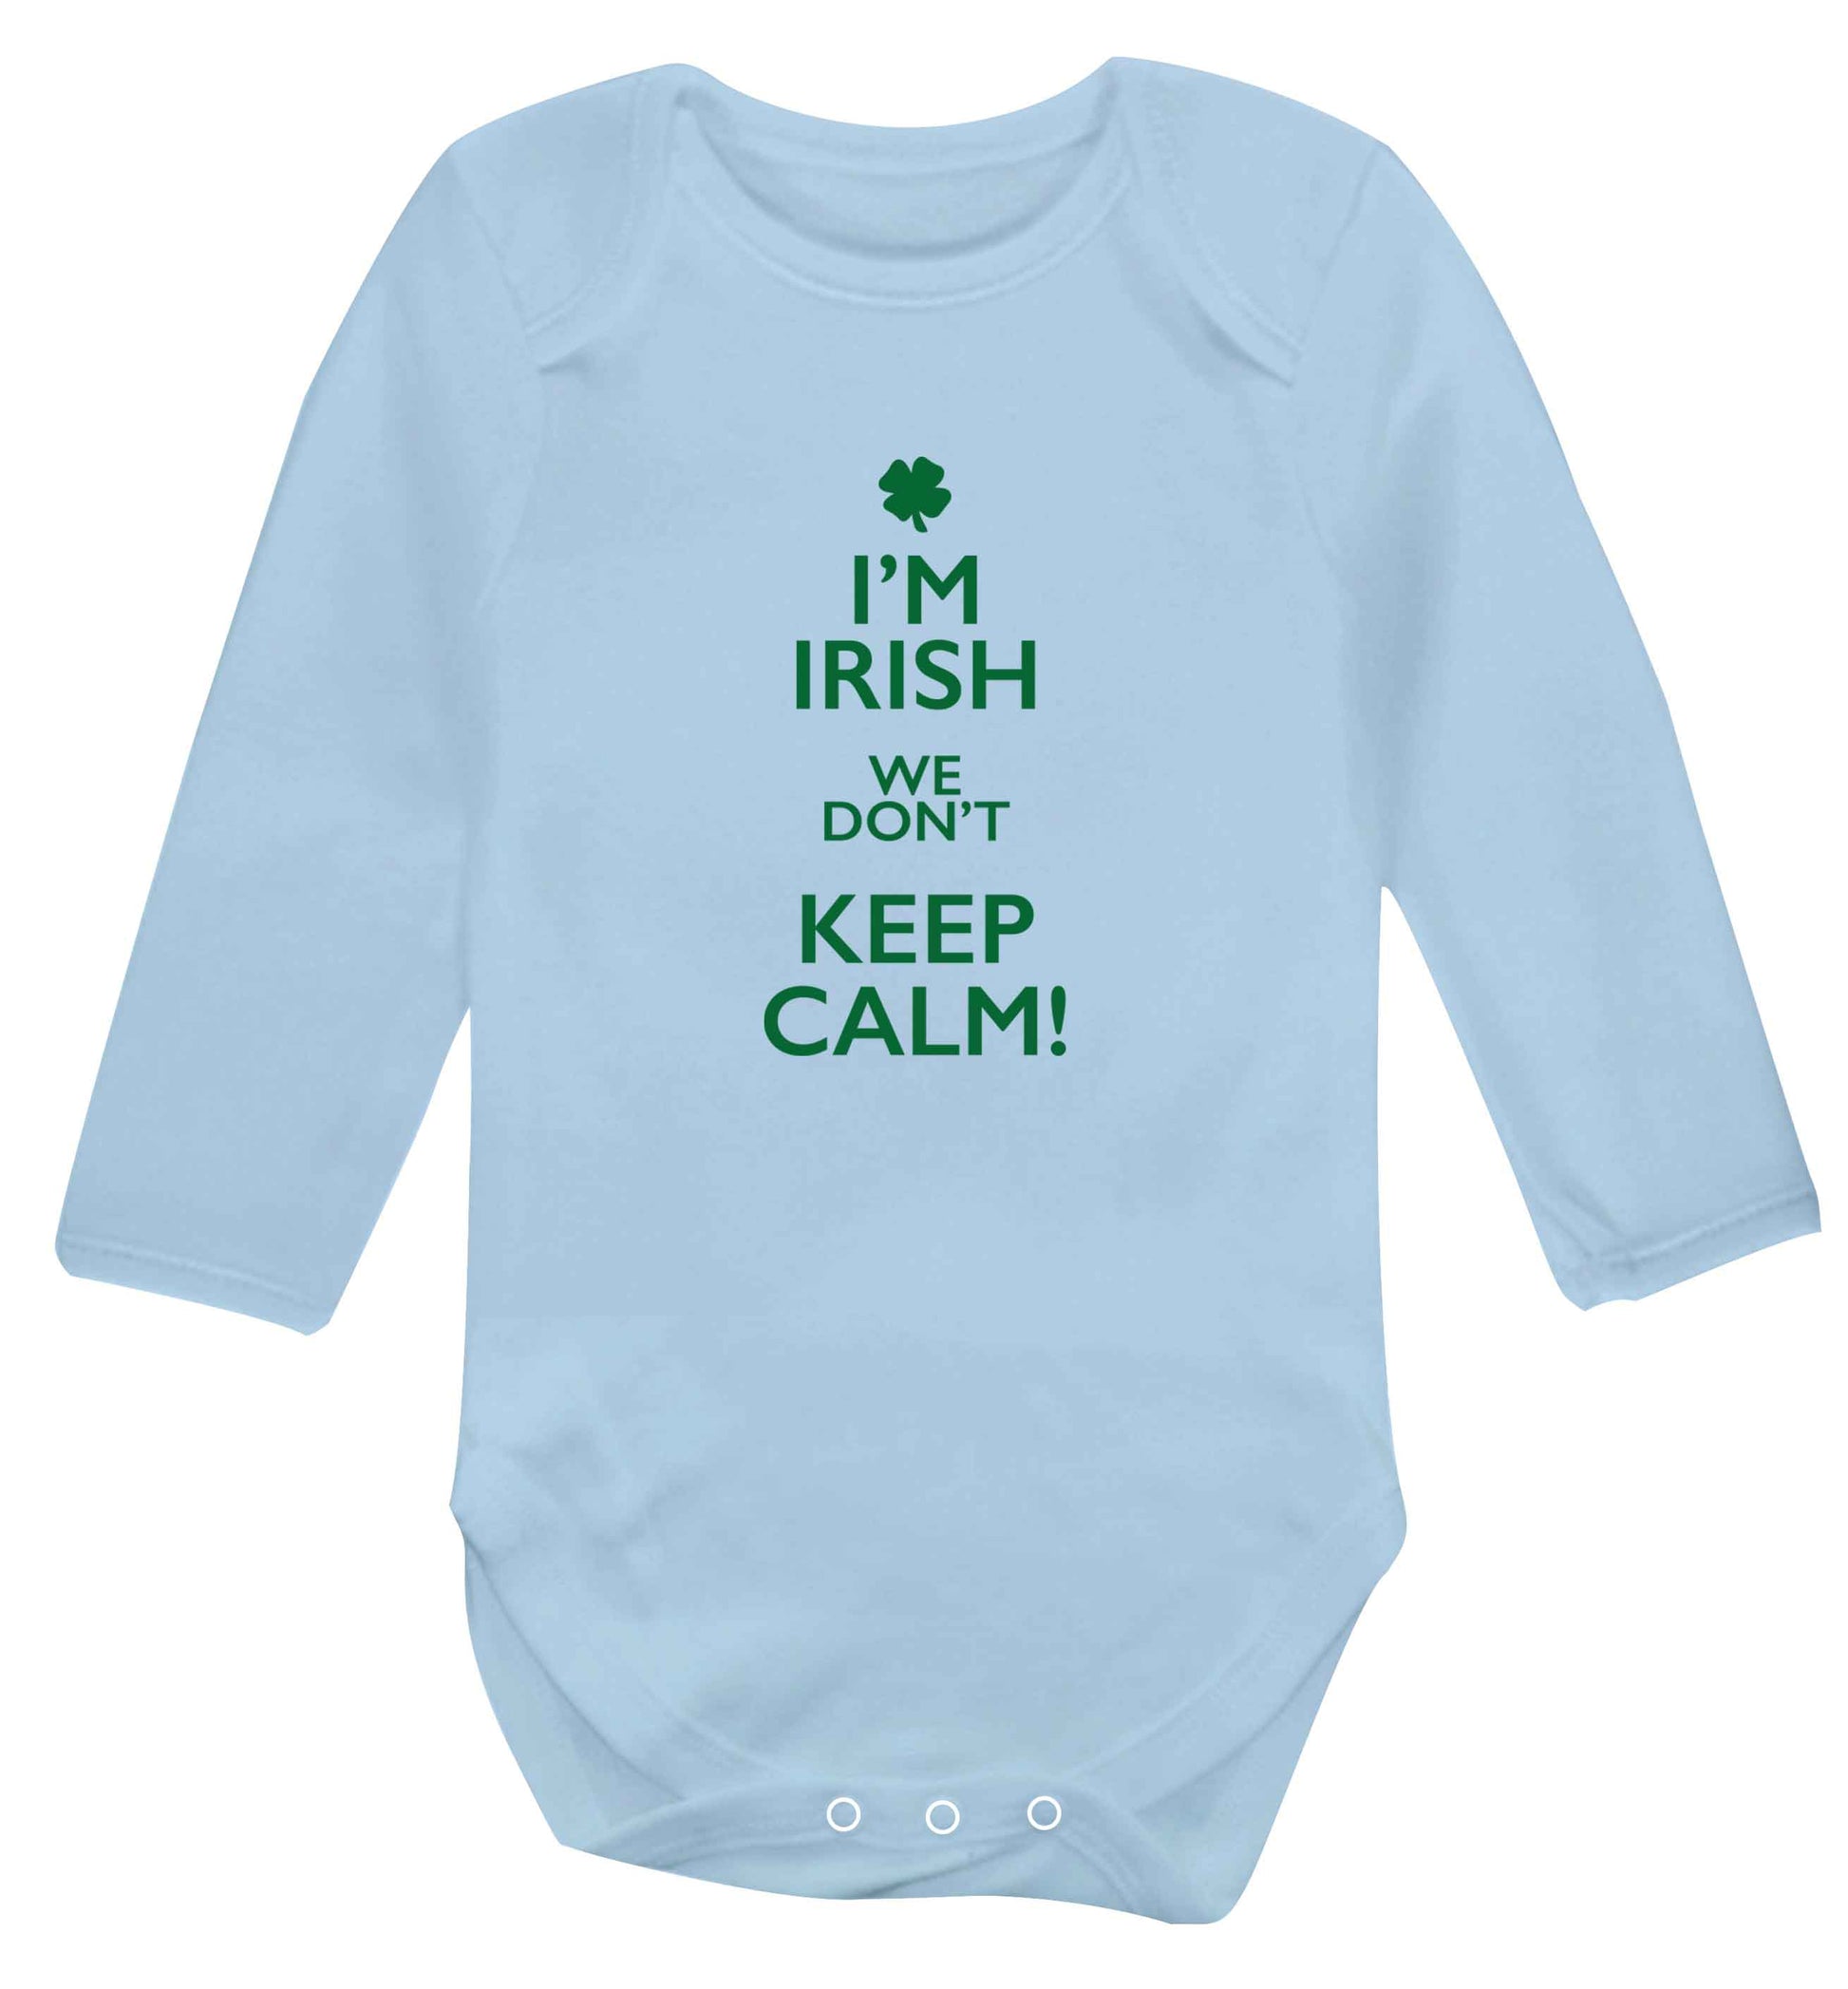 I'm Irish we don't keep calm baby vest long sleeved pale blue 6-12 months